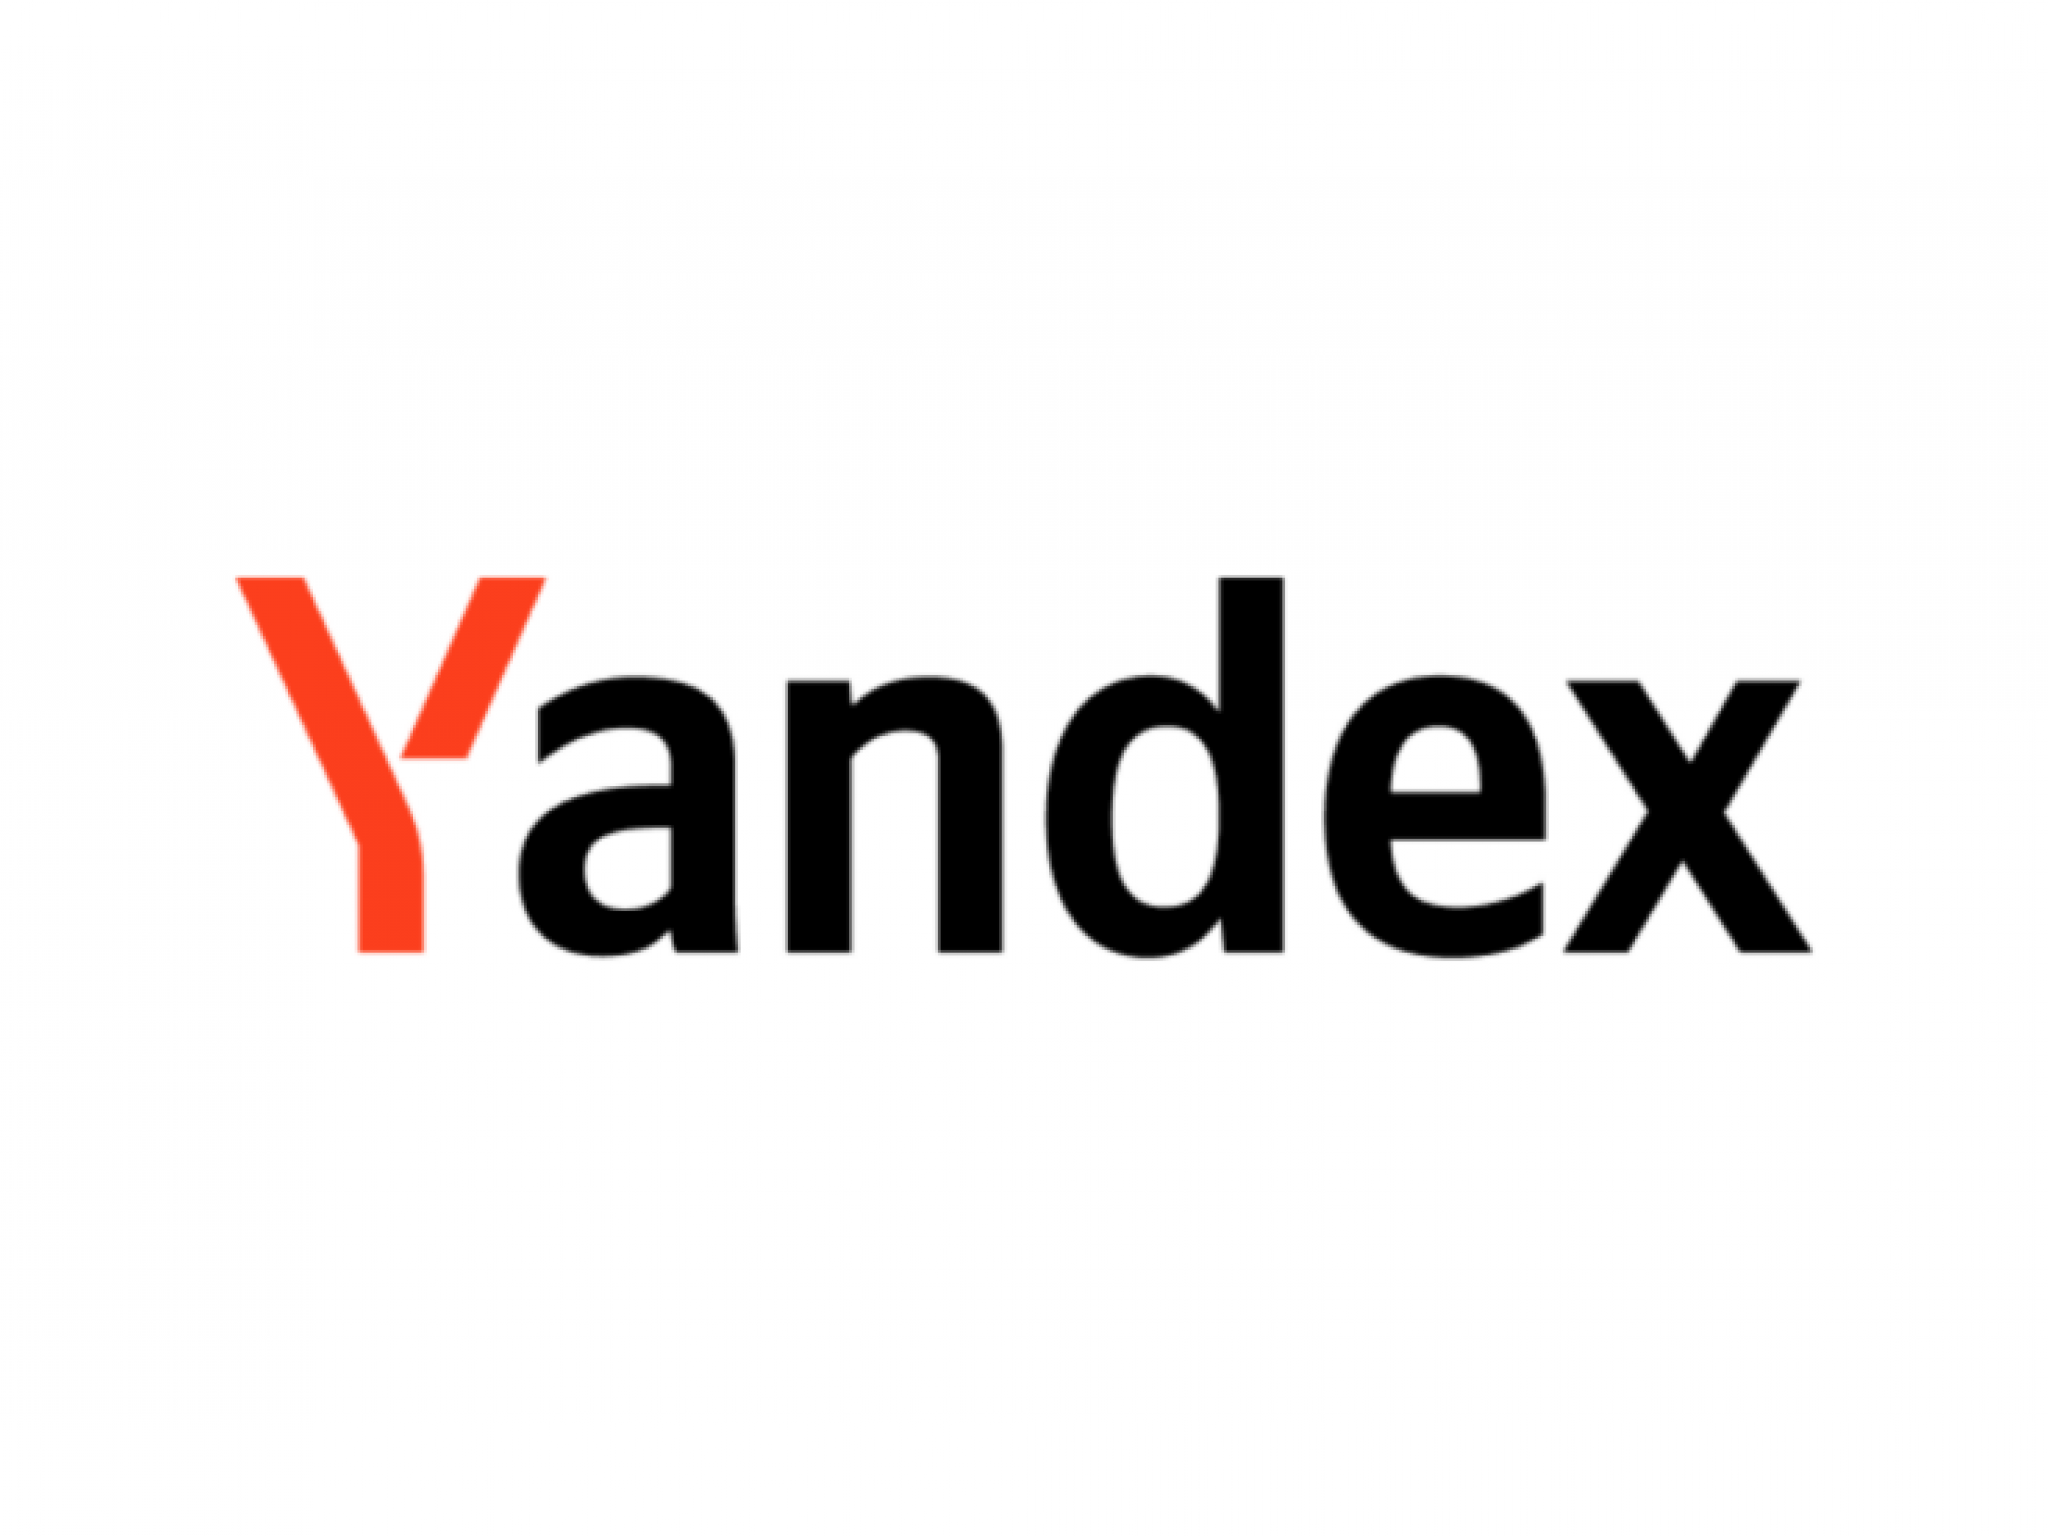  russias-google-yandex-navigates-strategic-turn-divests-russian-assets-for-over-5b 